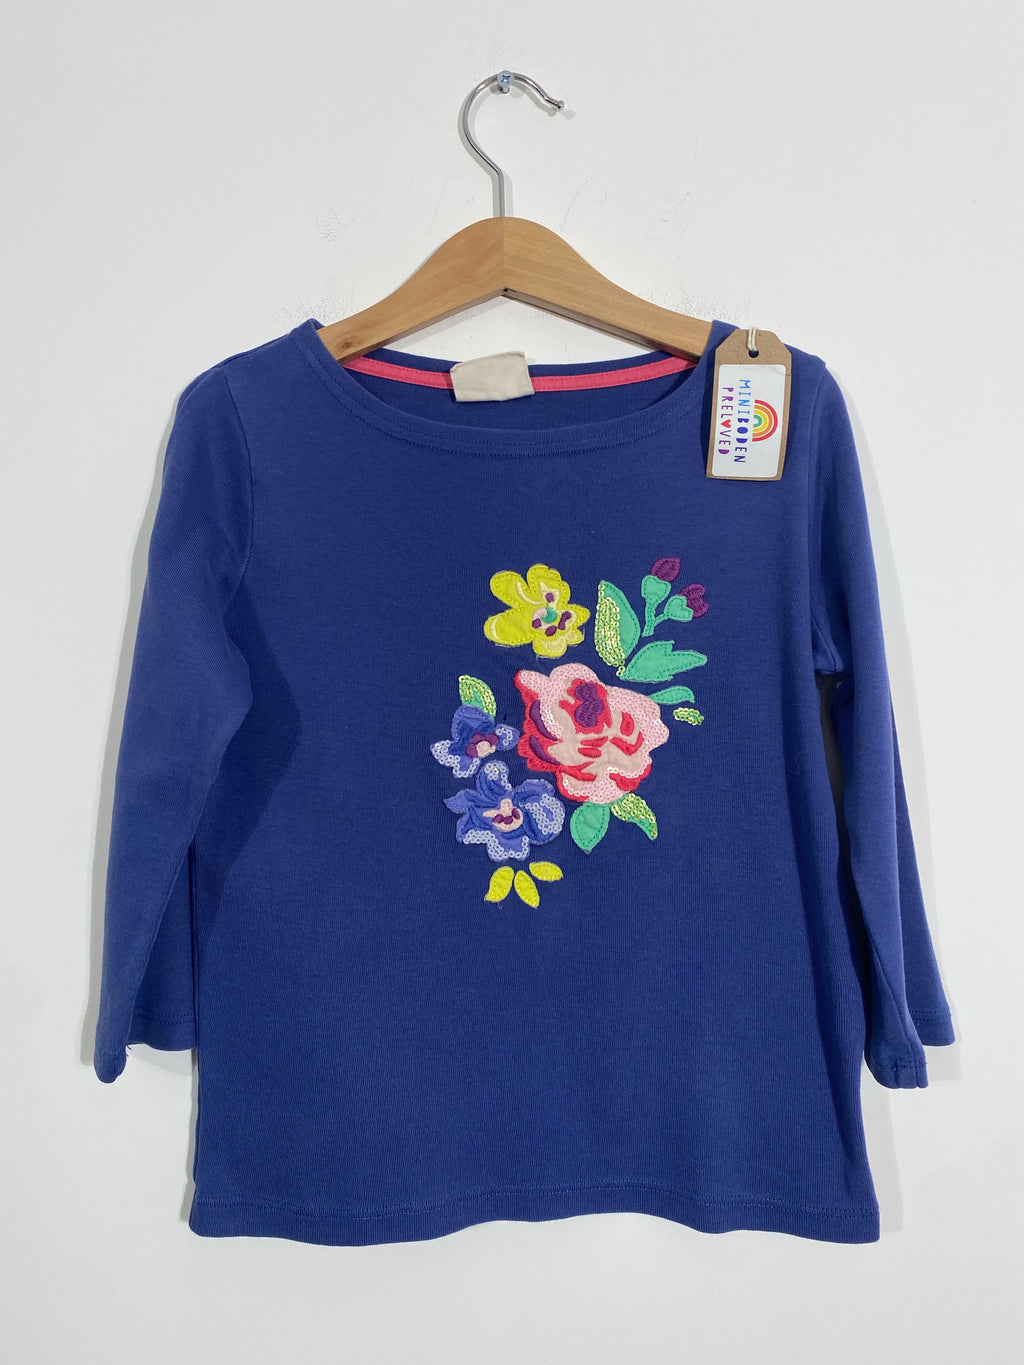 Pretty Blue Appliqué & Embroidered Flowers Top (6-7 Years)